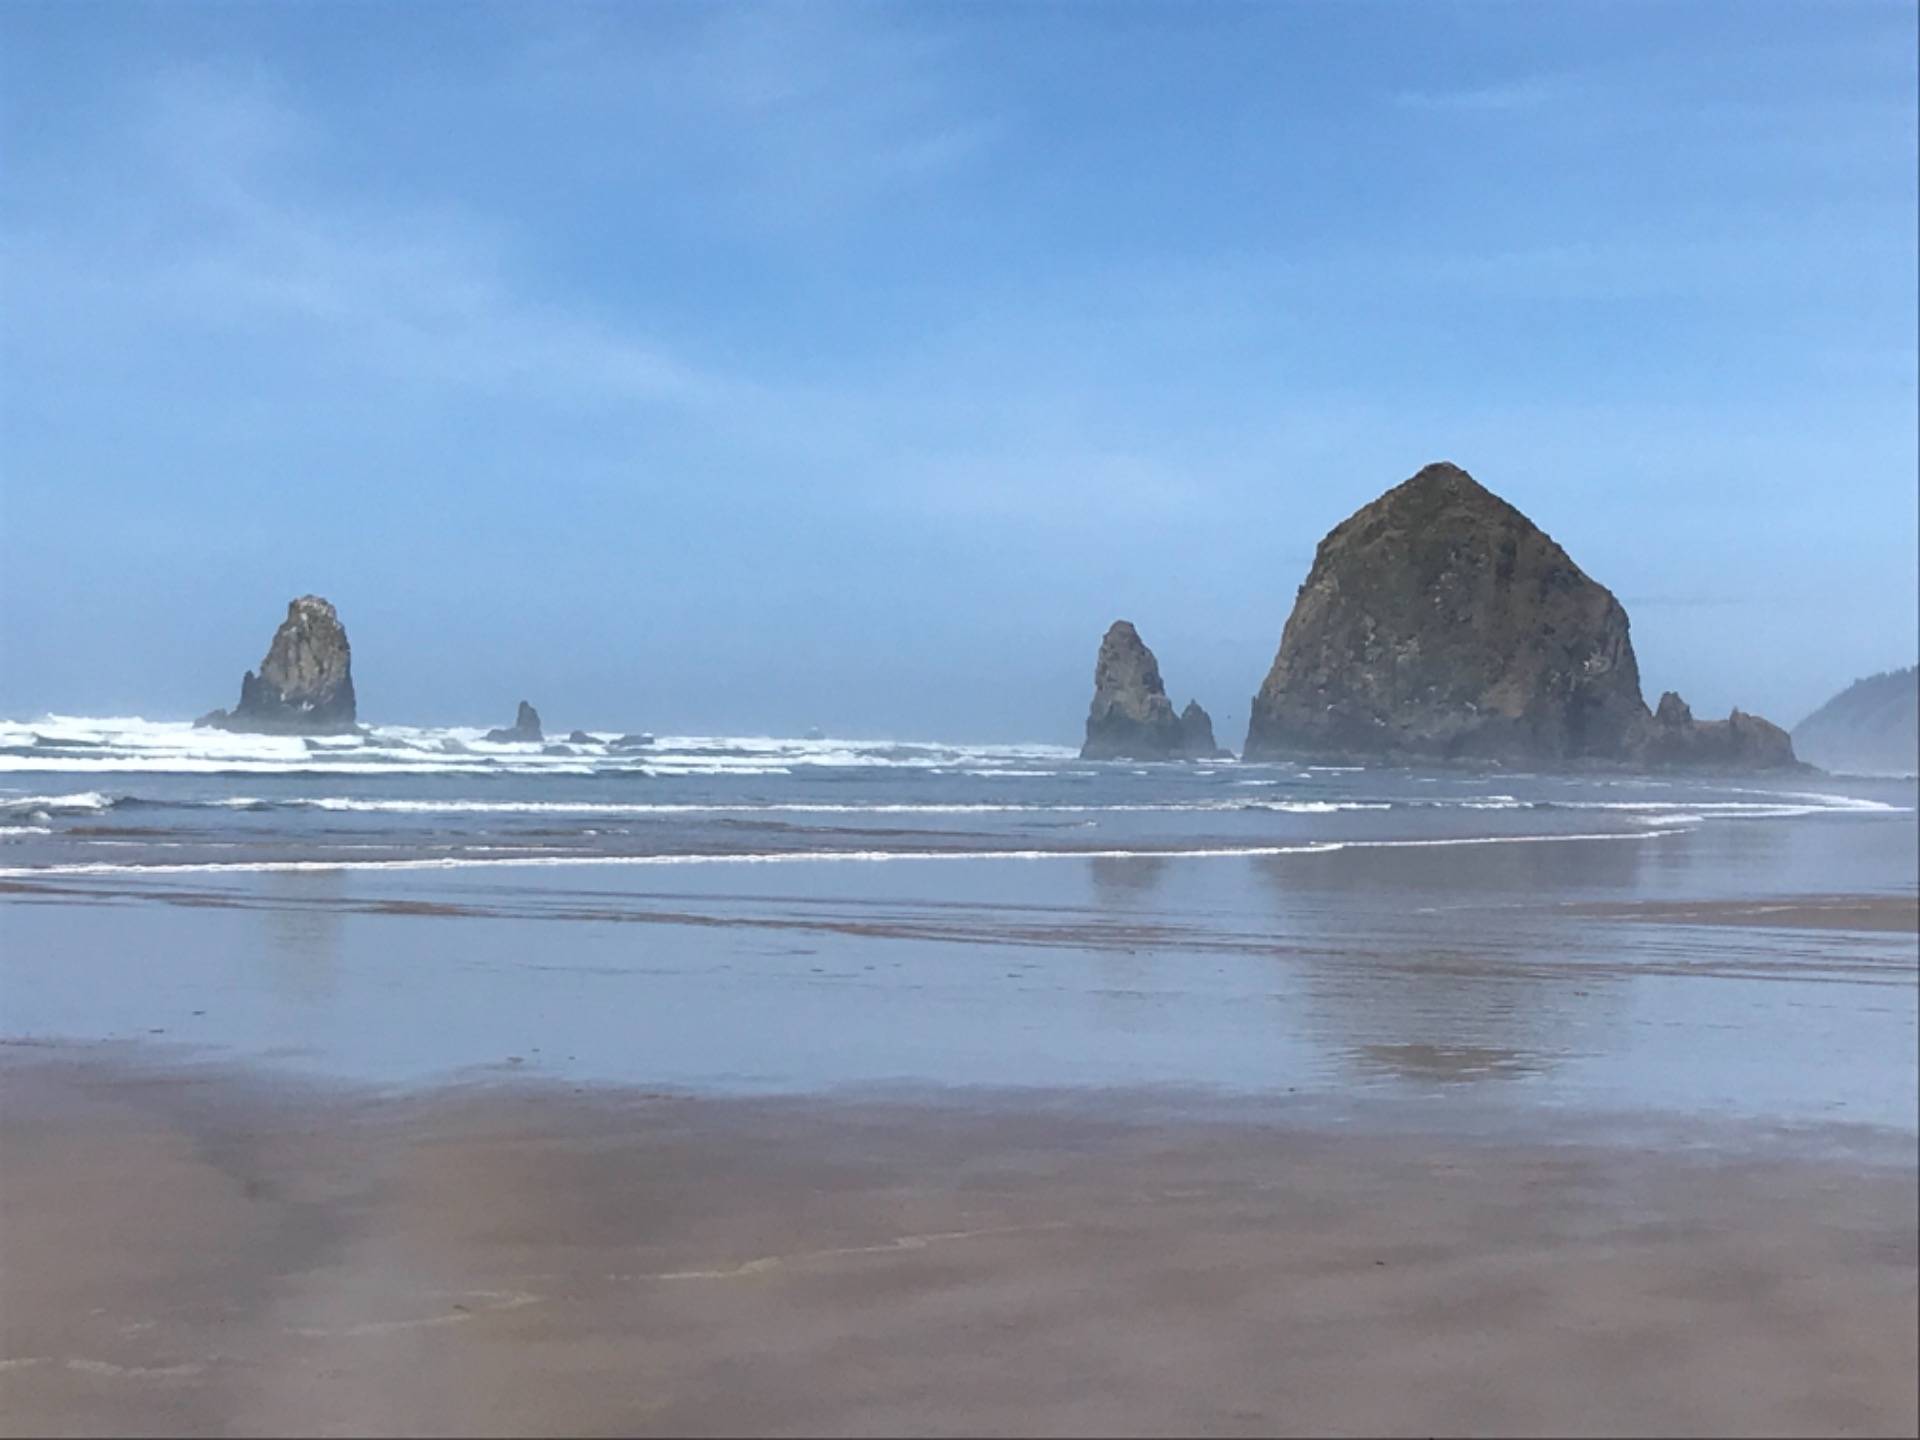 Haystack Rock, in Cannon Beach, is the most recognizable and photographed landmark on the Oregon Coast. The rock itself is a breeding ground for tufted puffins, and the base is surrounded by tidal pools.